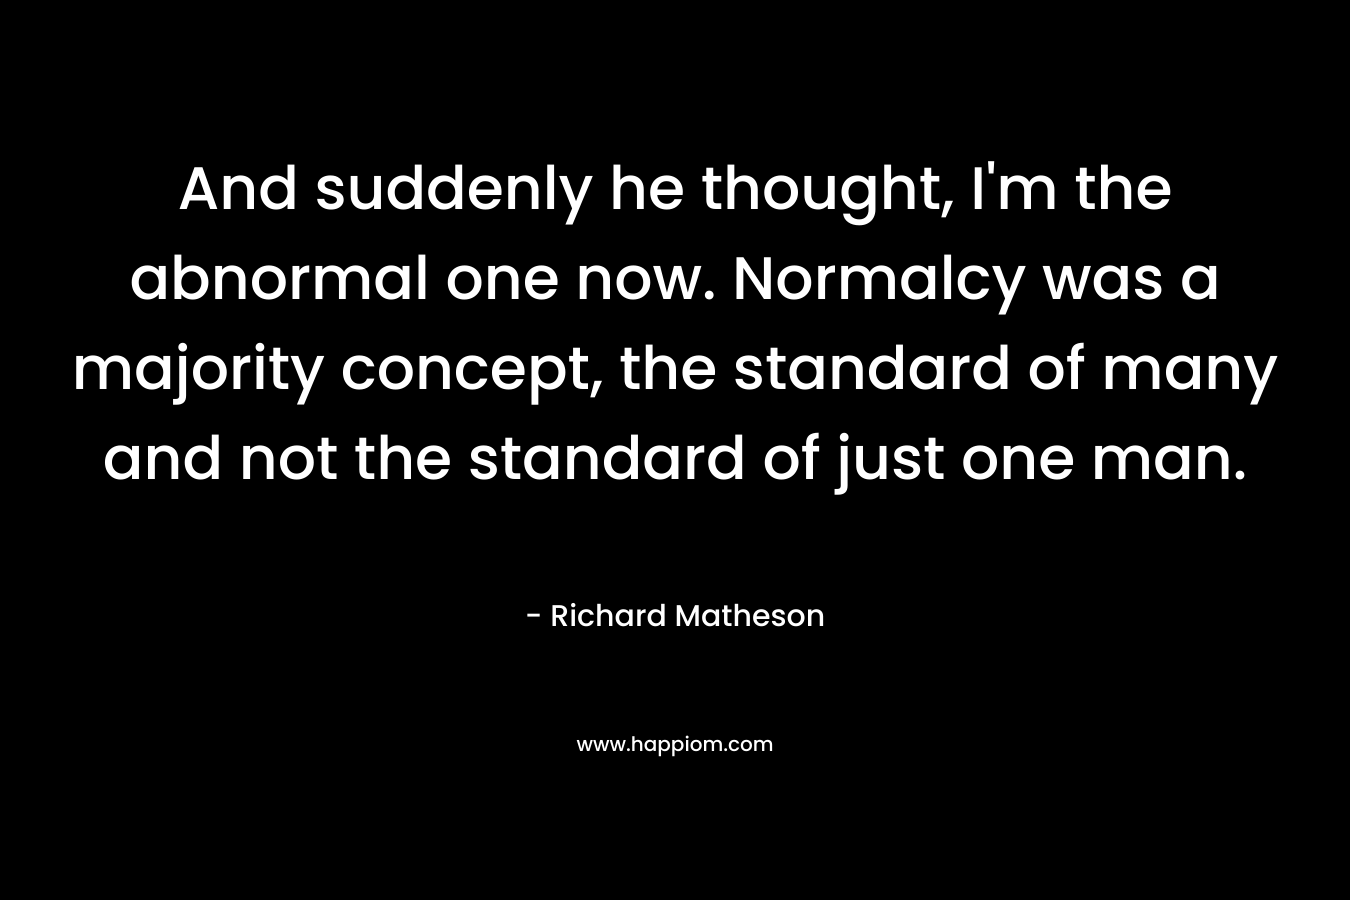 And suddenly he thought, I’m the abnormal one now. Normalcy was a majority concept, the standard of many and not the standard of just one man. – Richard Matheson